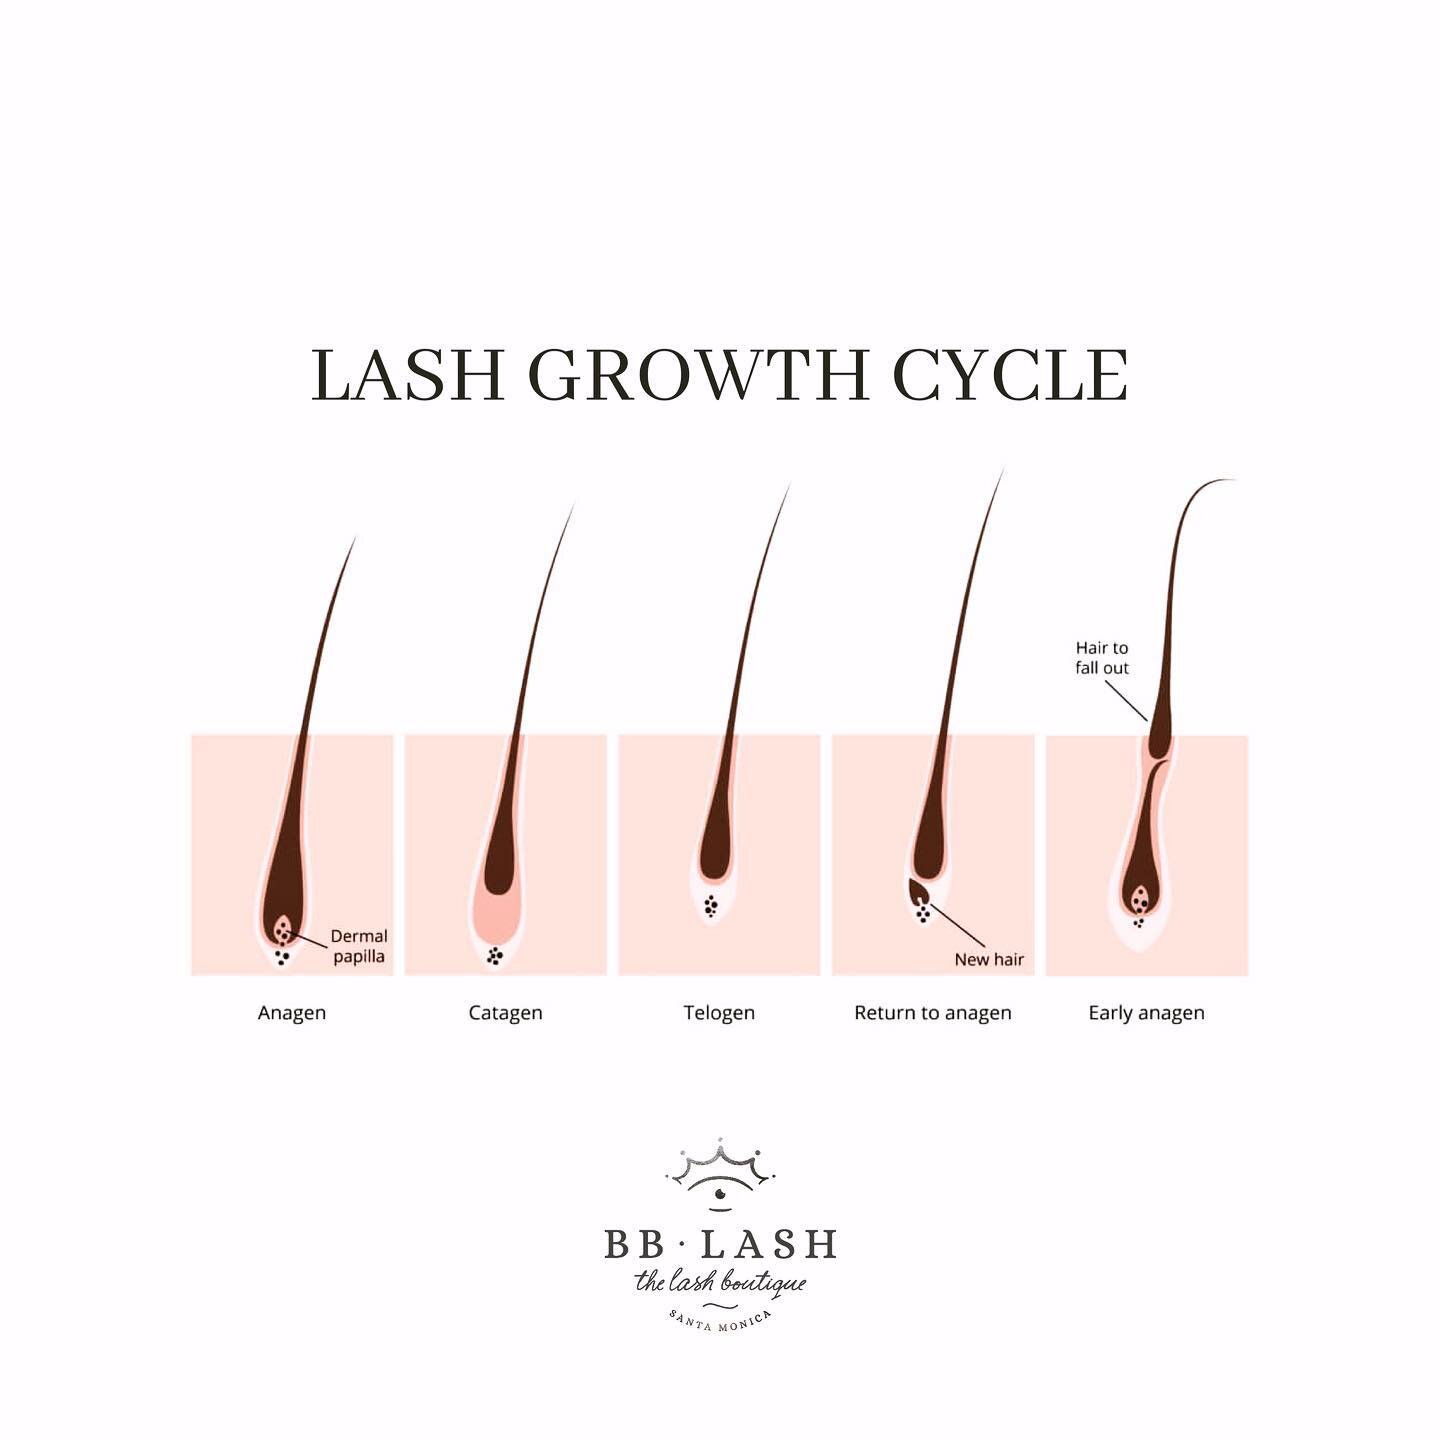 Why are regular fills so important? 

Everyone is born with a predetermined number of hair follicles, and each individual eyelash is programmed to reach a certain length before shedding. But worry not, like everything on earth, living or otherwise, e